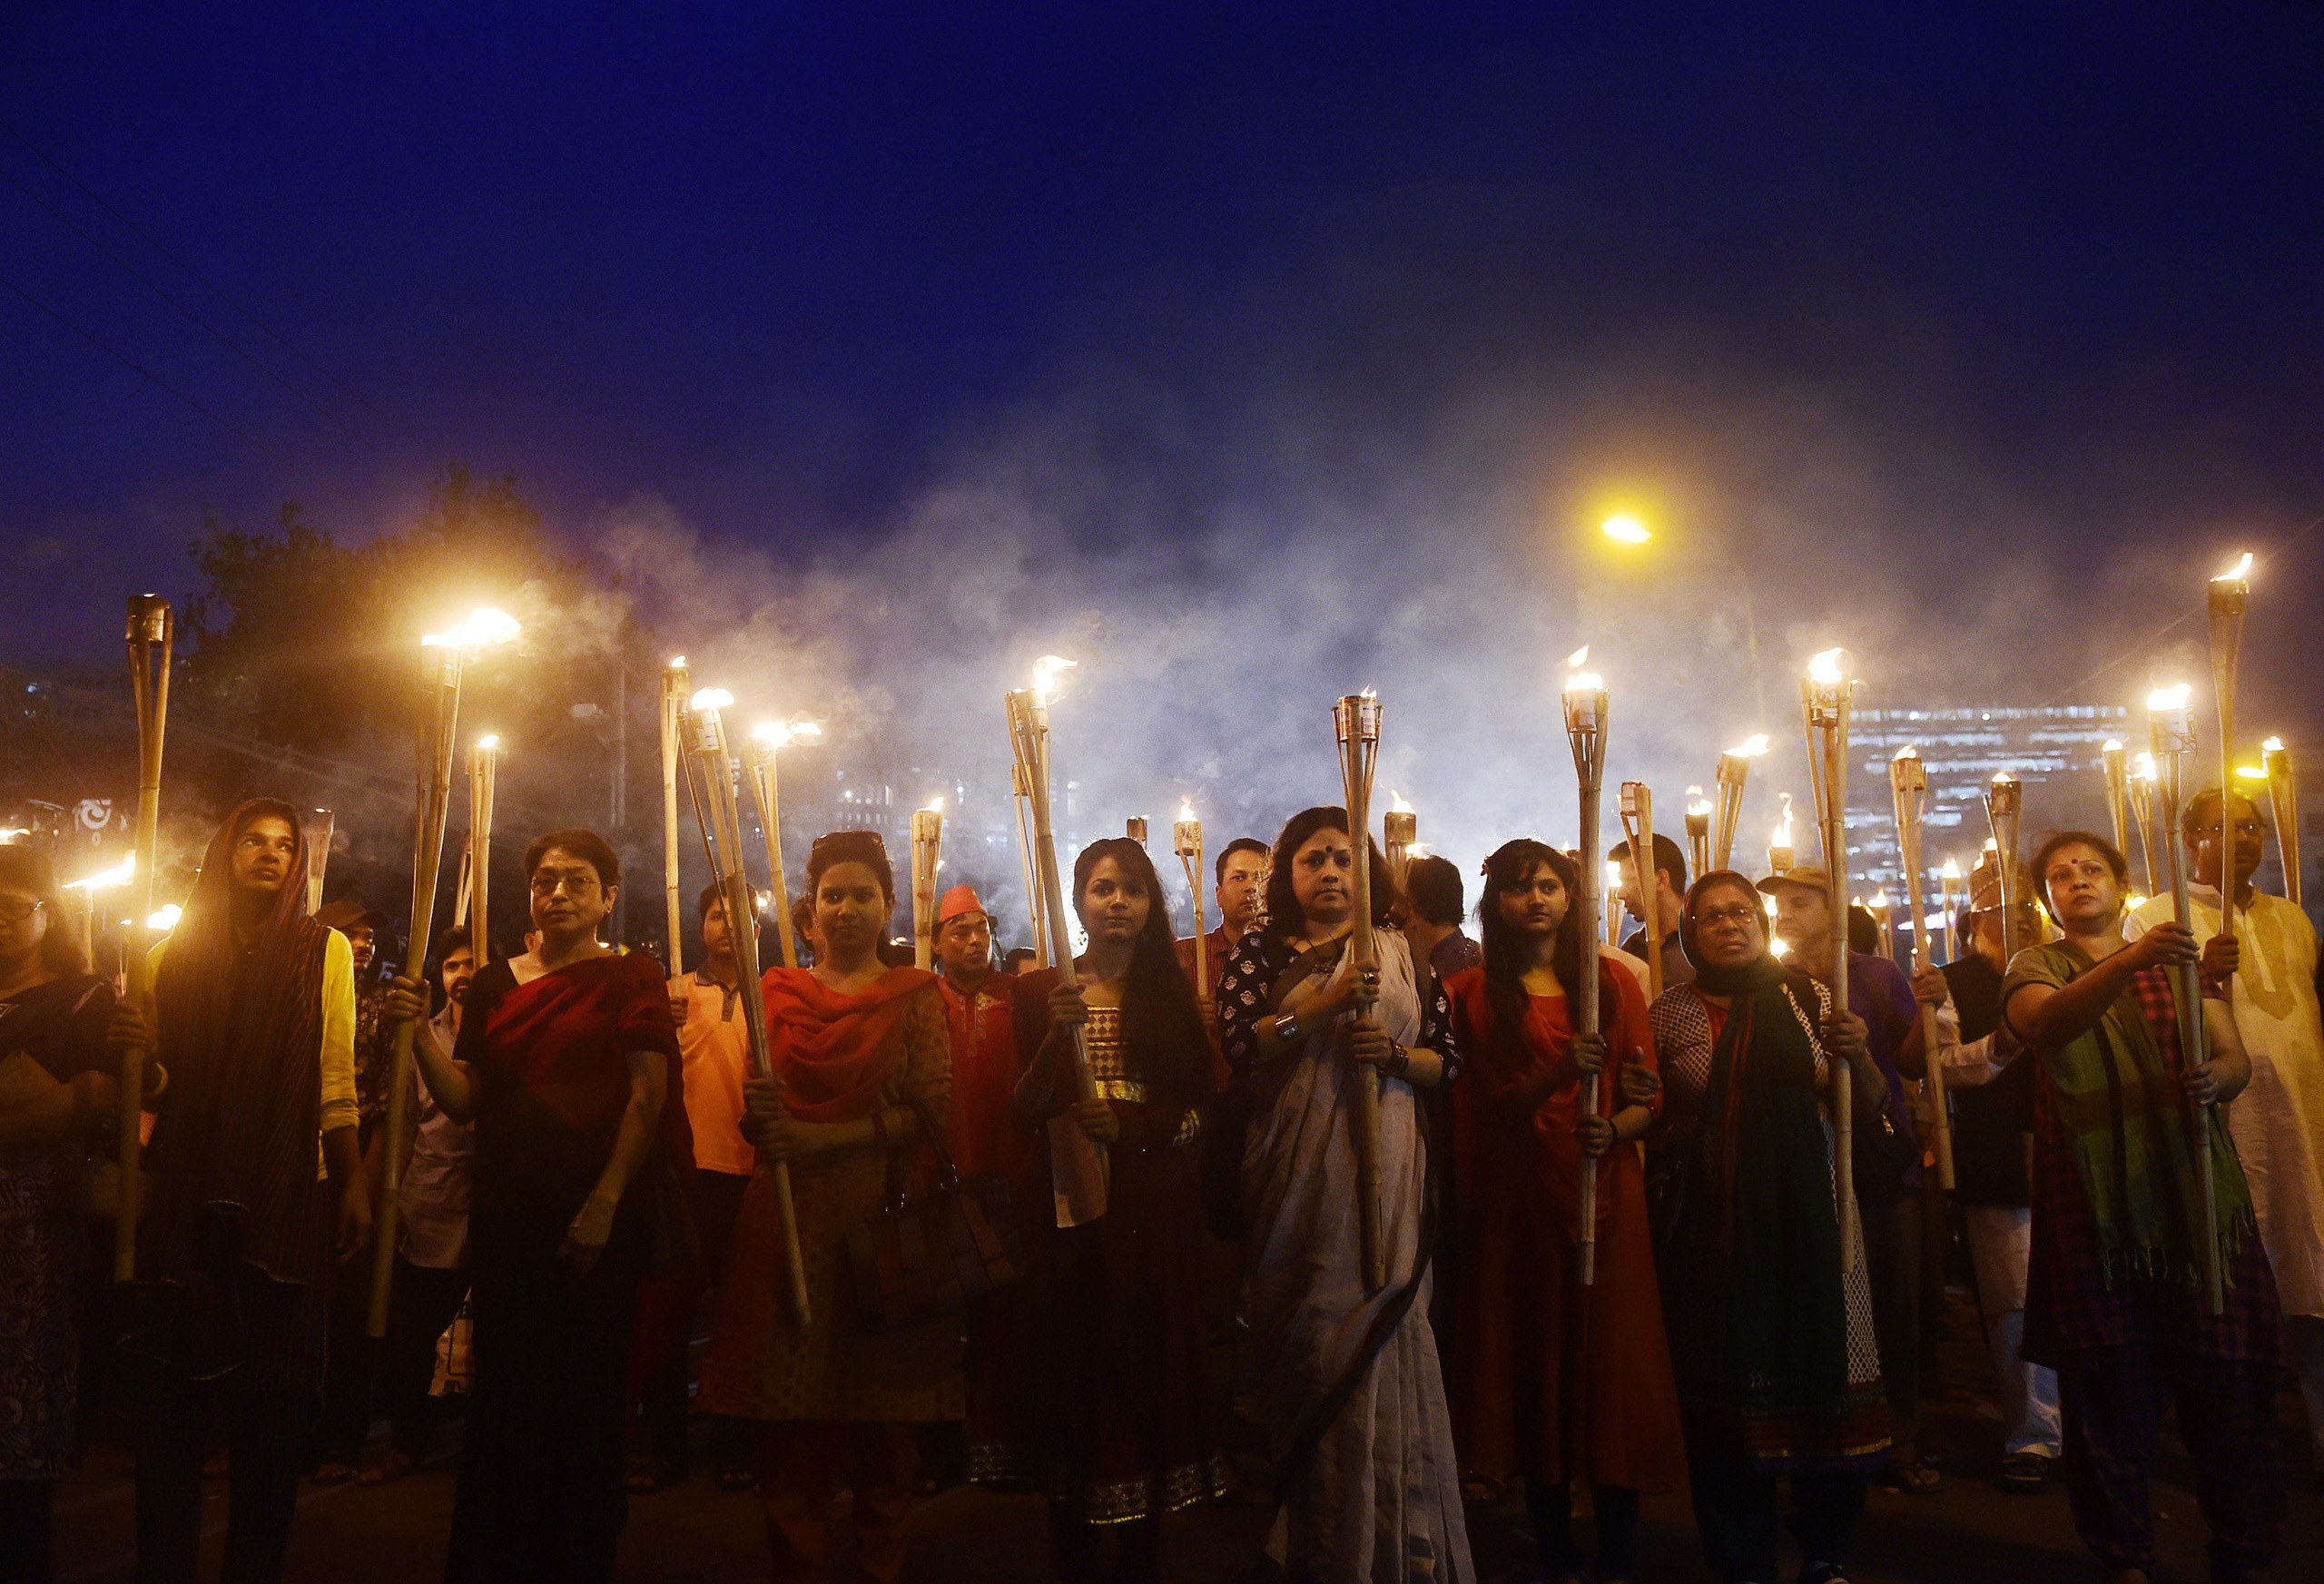 Bangladeshi activists take part in a protest in Dhaka on Feb. 27 over the murder of the secular blogger Avijit Roy. (Munir Uz Zaman—AFP/Getty Images)